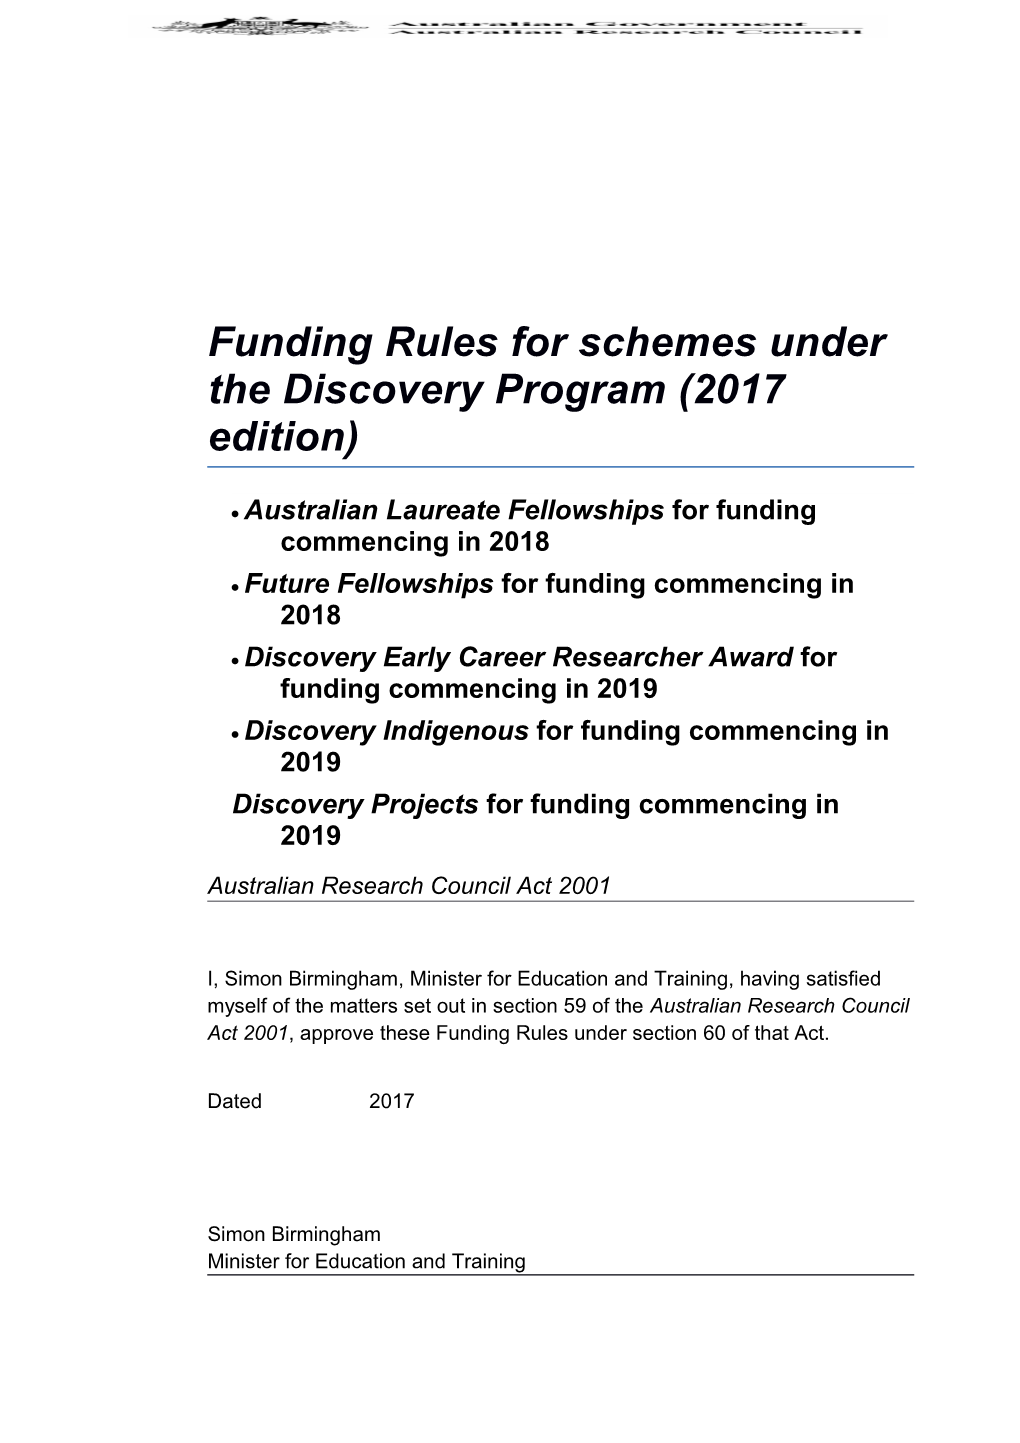 Funding Rules for Schemes Under the Discovery Program(2017Edition)